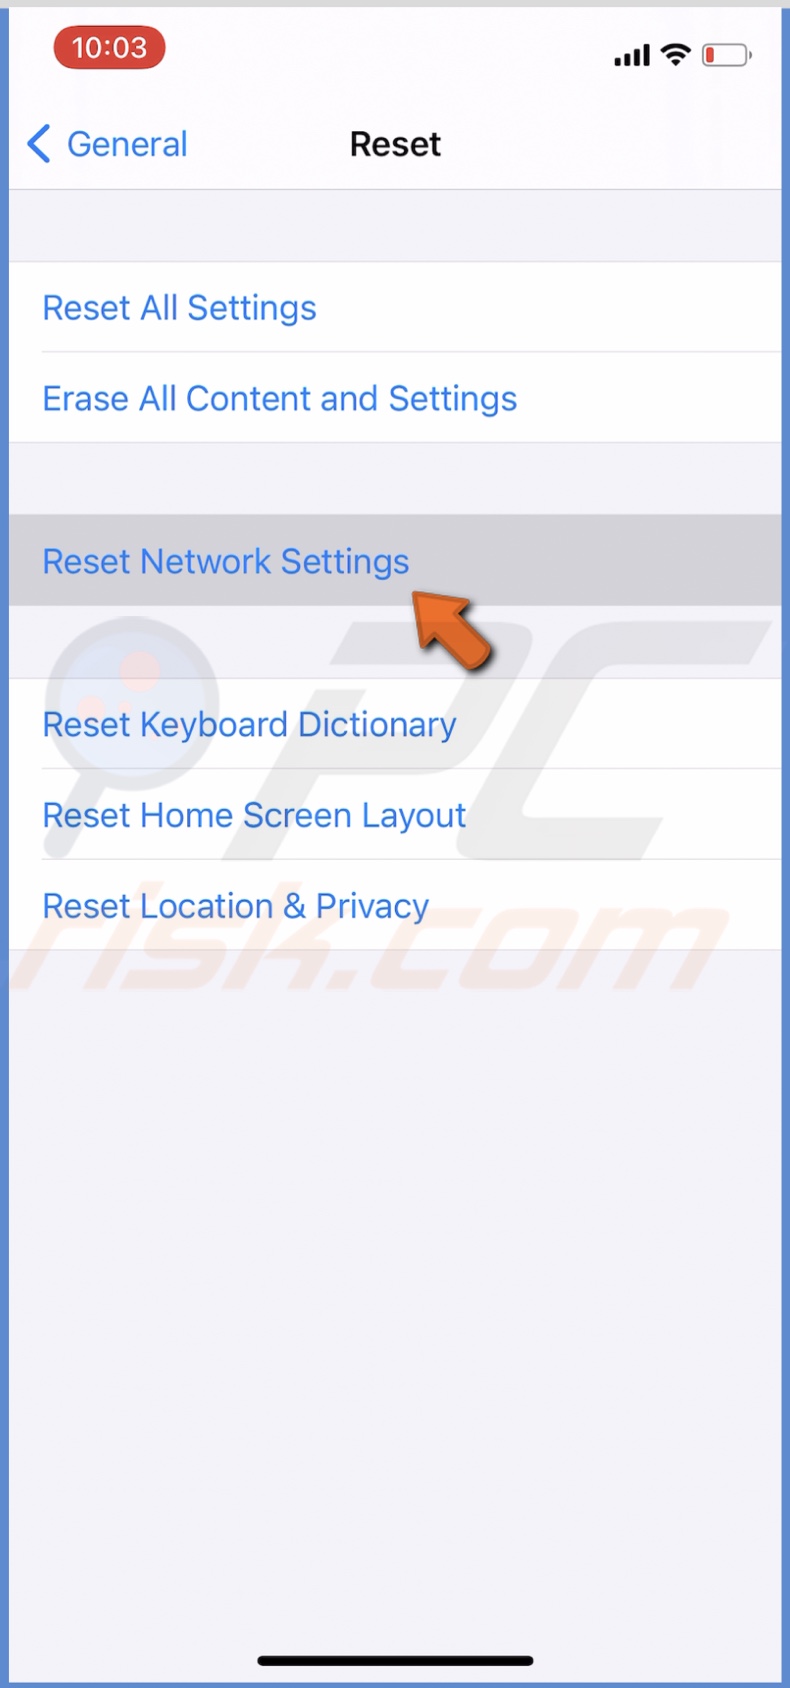 Tap on Reset Network Setings